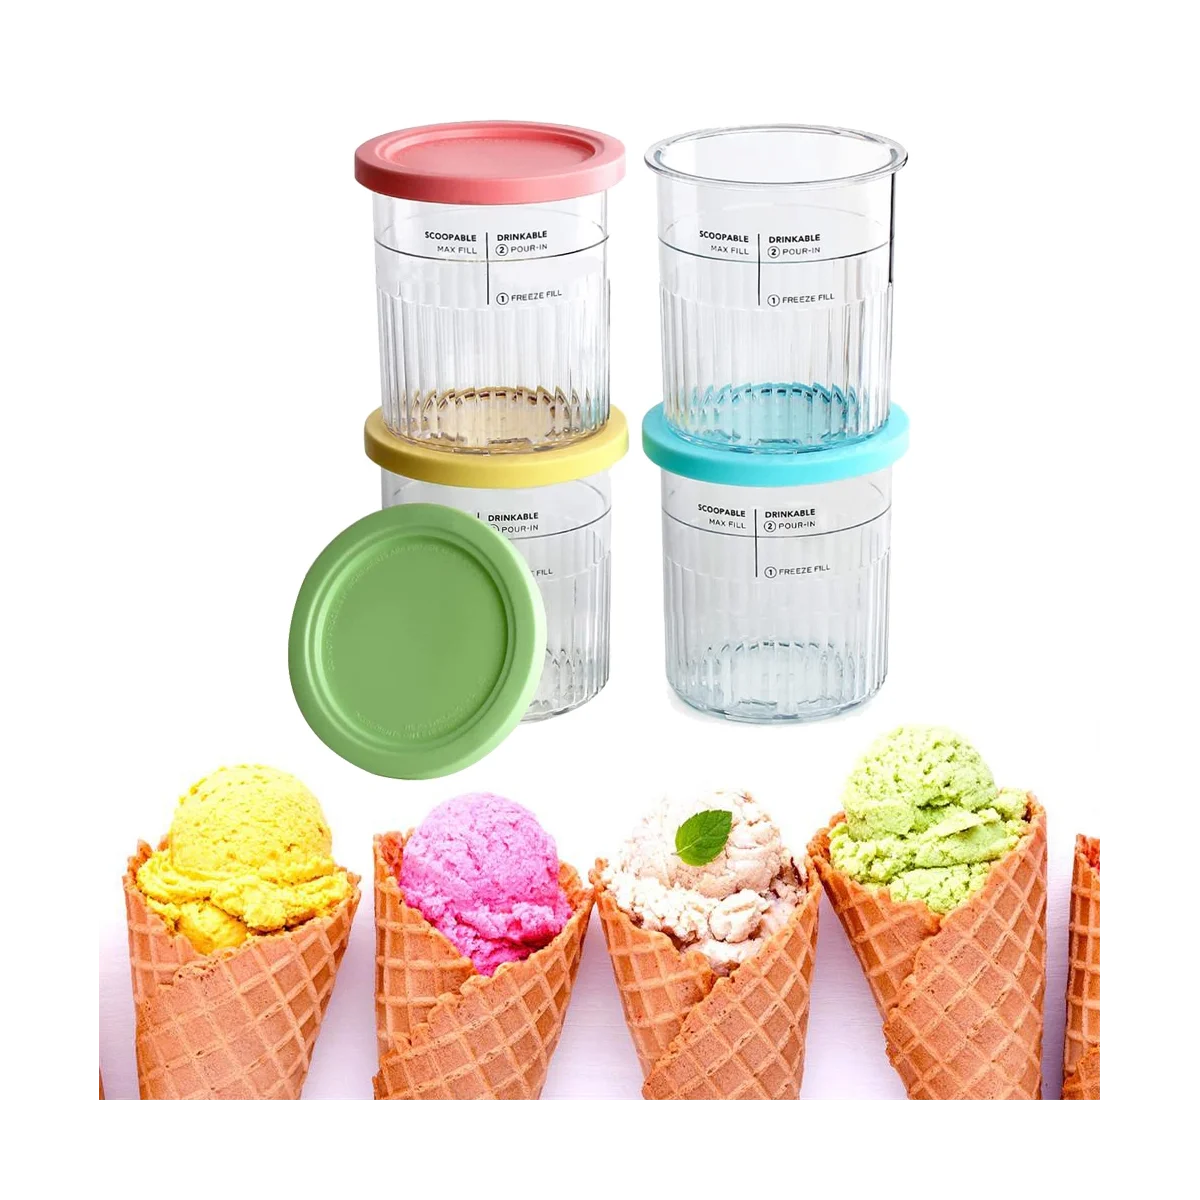 https://ae01.alicdn.com/kf/Sc0360342b35843d29130a07d36dffecdd/4PCS-Ice-Cream-Pints-and-Lids-for-Ninja-Creami-NC500-NC501-Ice-Cream-Storage-Containers-Food.jpg